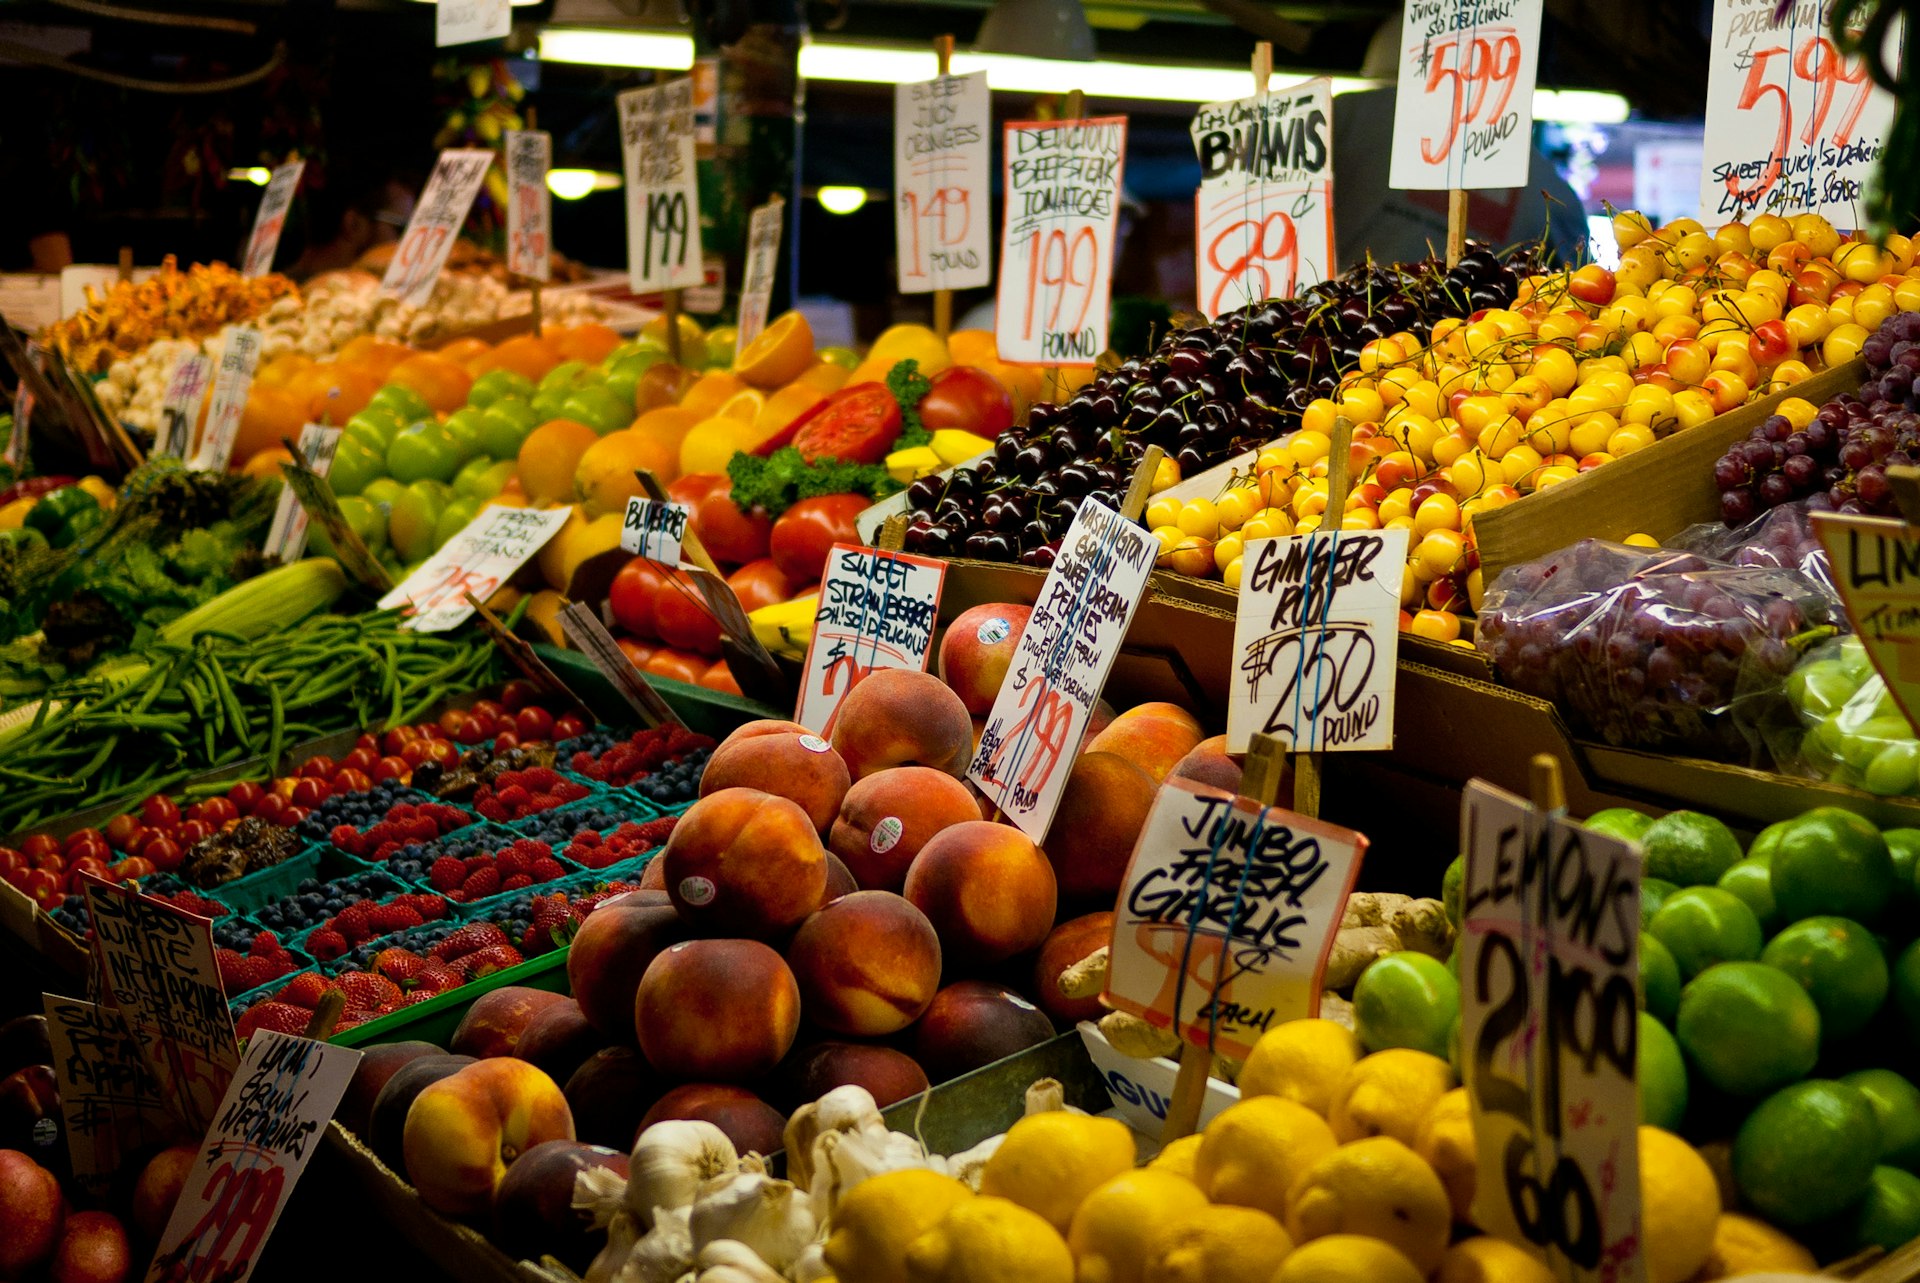 Seattle's farmers markets offer some of the freshest options around. Image by Brandon / CC BY-SA 2.0